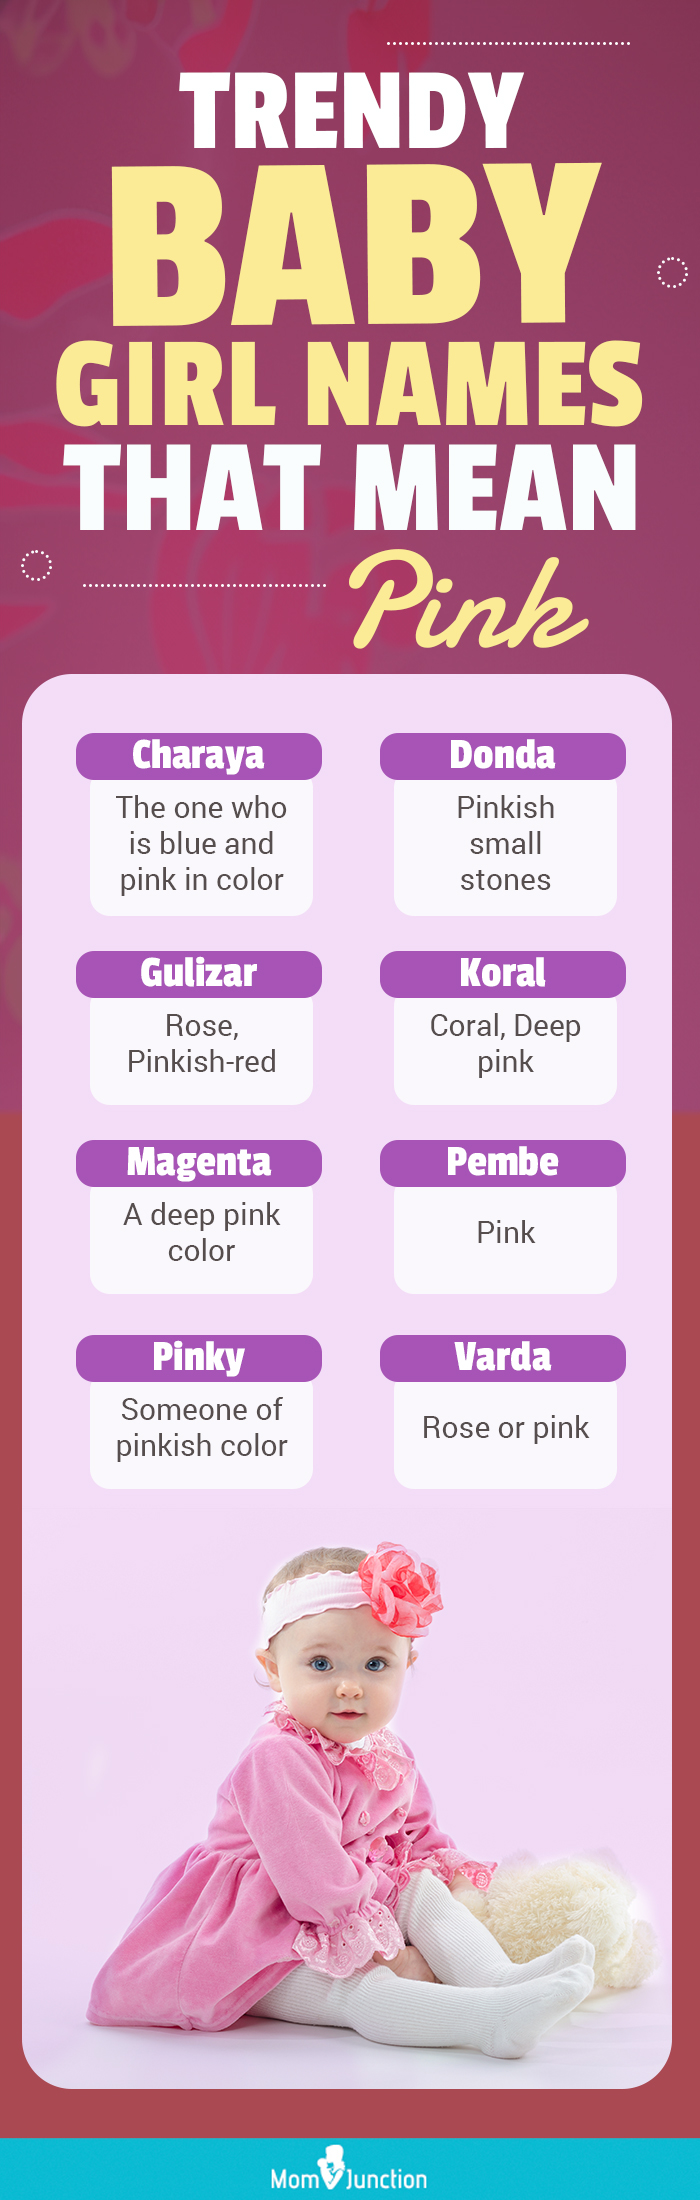 Trendy Baby Girl Names That Mean Pink (infographic)